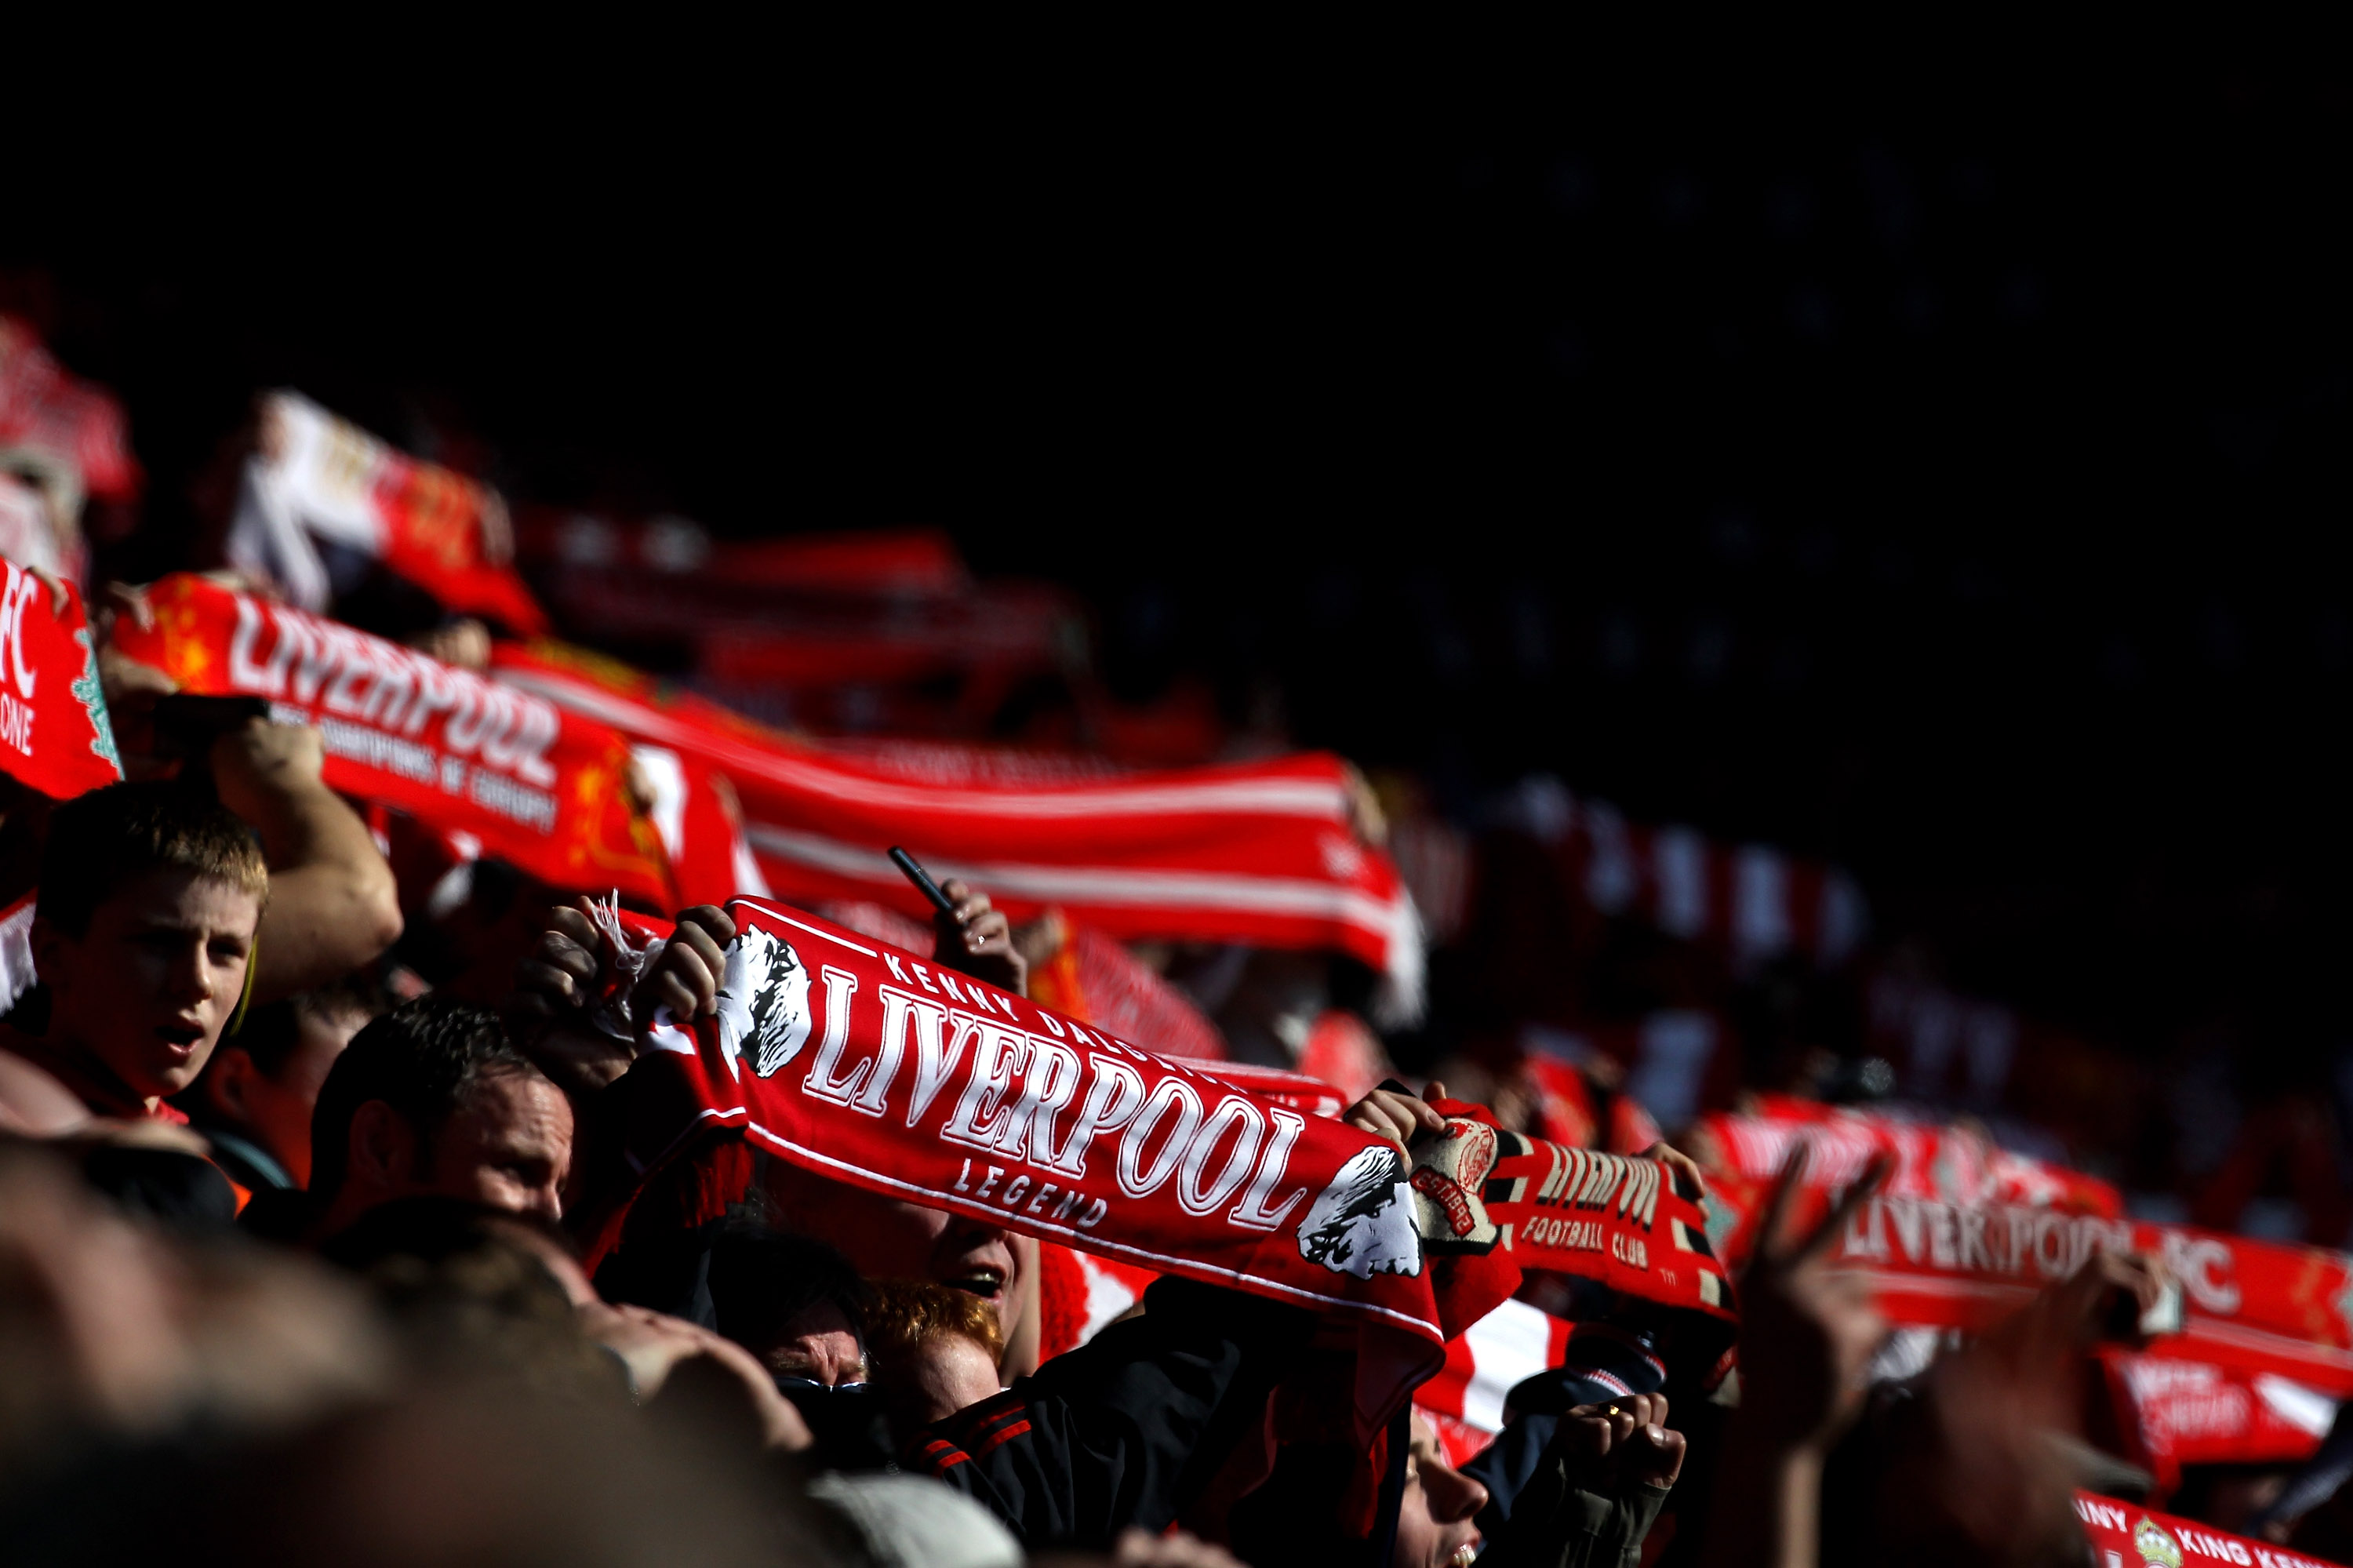 LIVERPOOL, UNITED KINGDOM - MARCH 06:  Liverpool fans show their support during the Barclays Premier League match between Liverpool and Manchester United at Anfield on March 6, 2011 in Liverpool, England. (Photo by Alex Livesey/Getty Images)